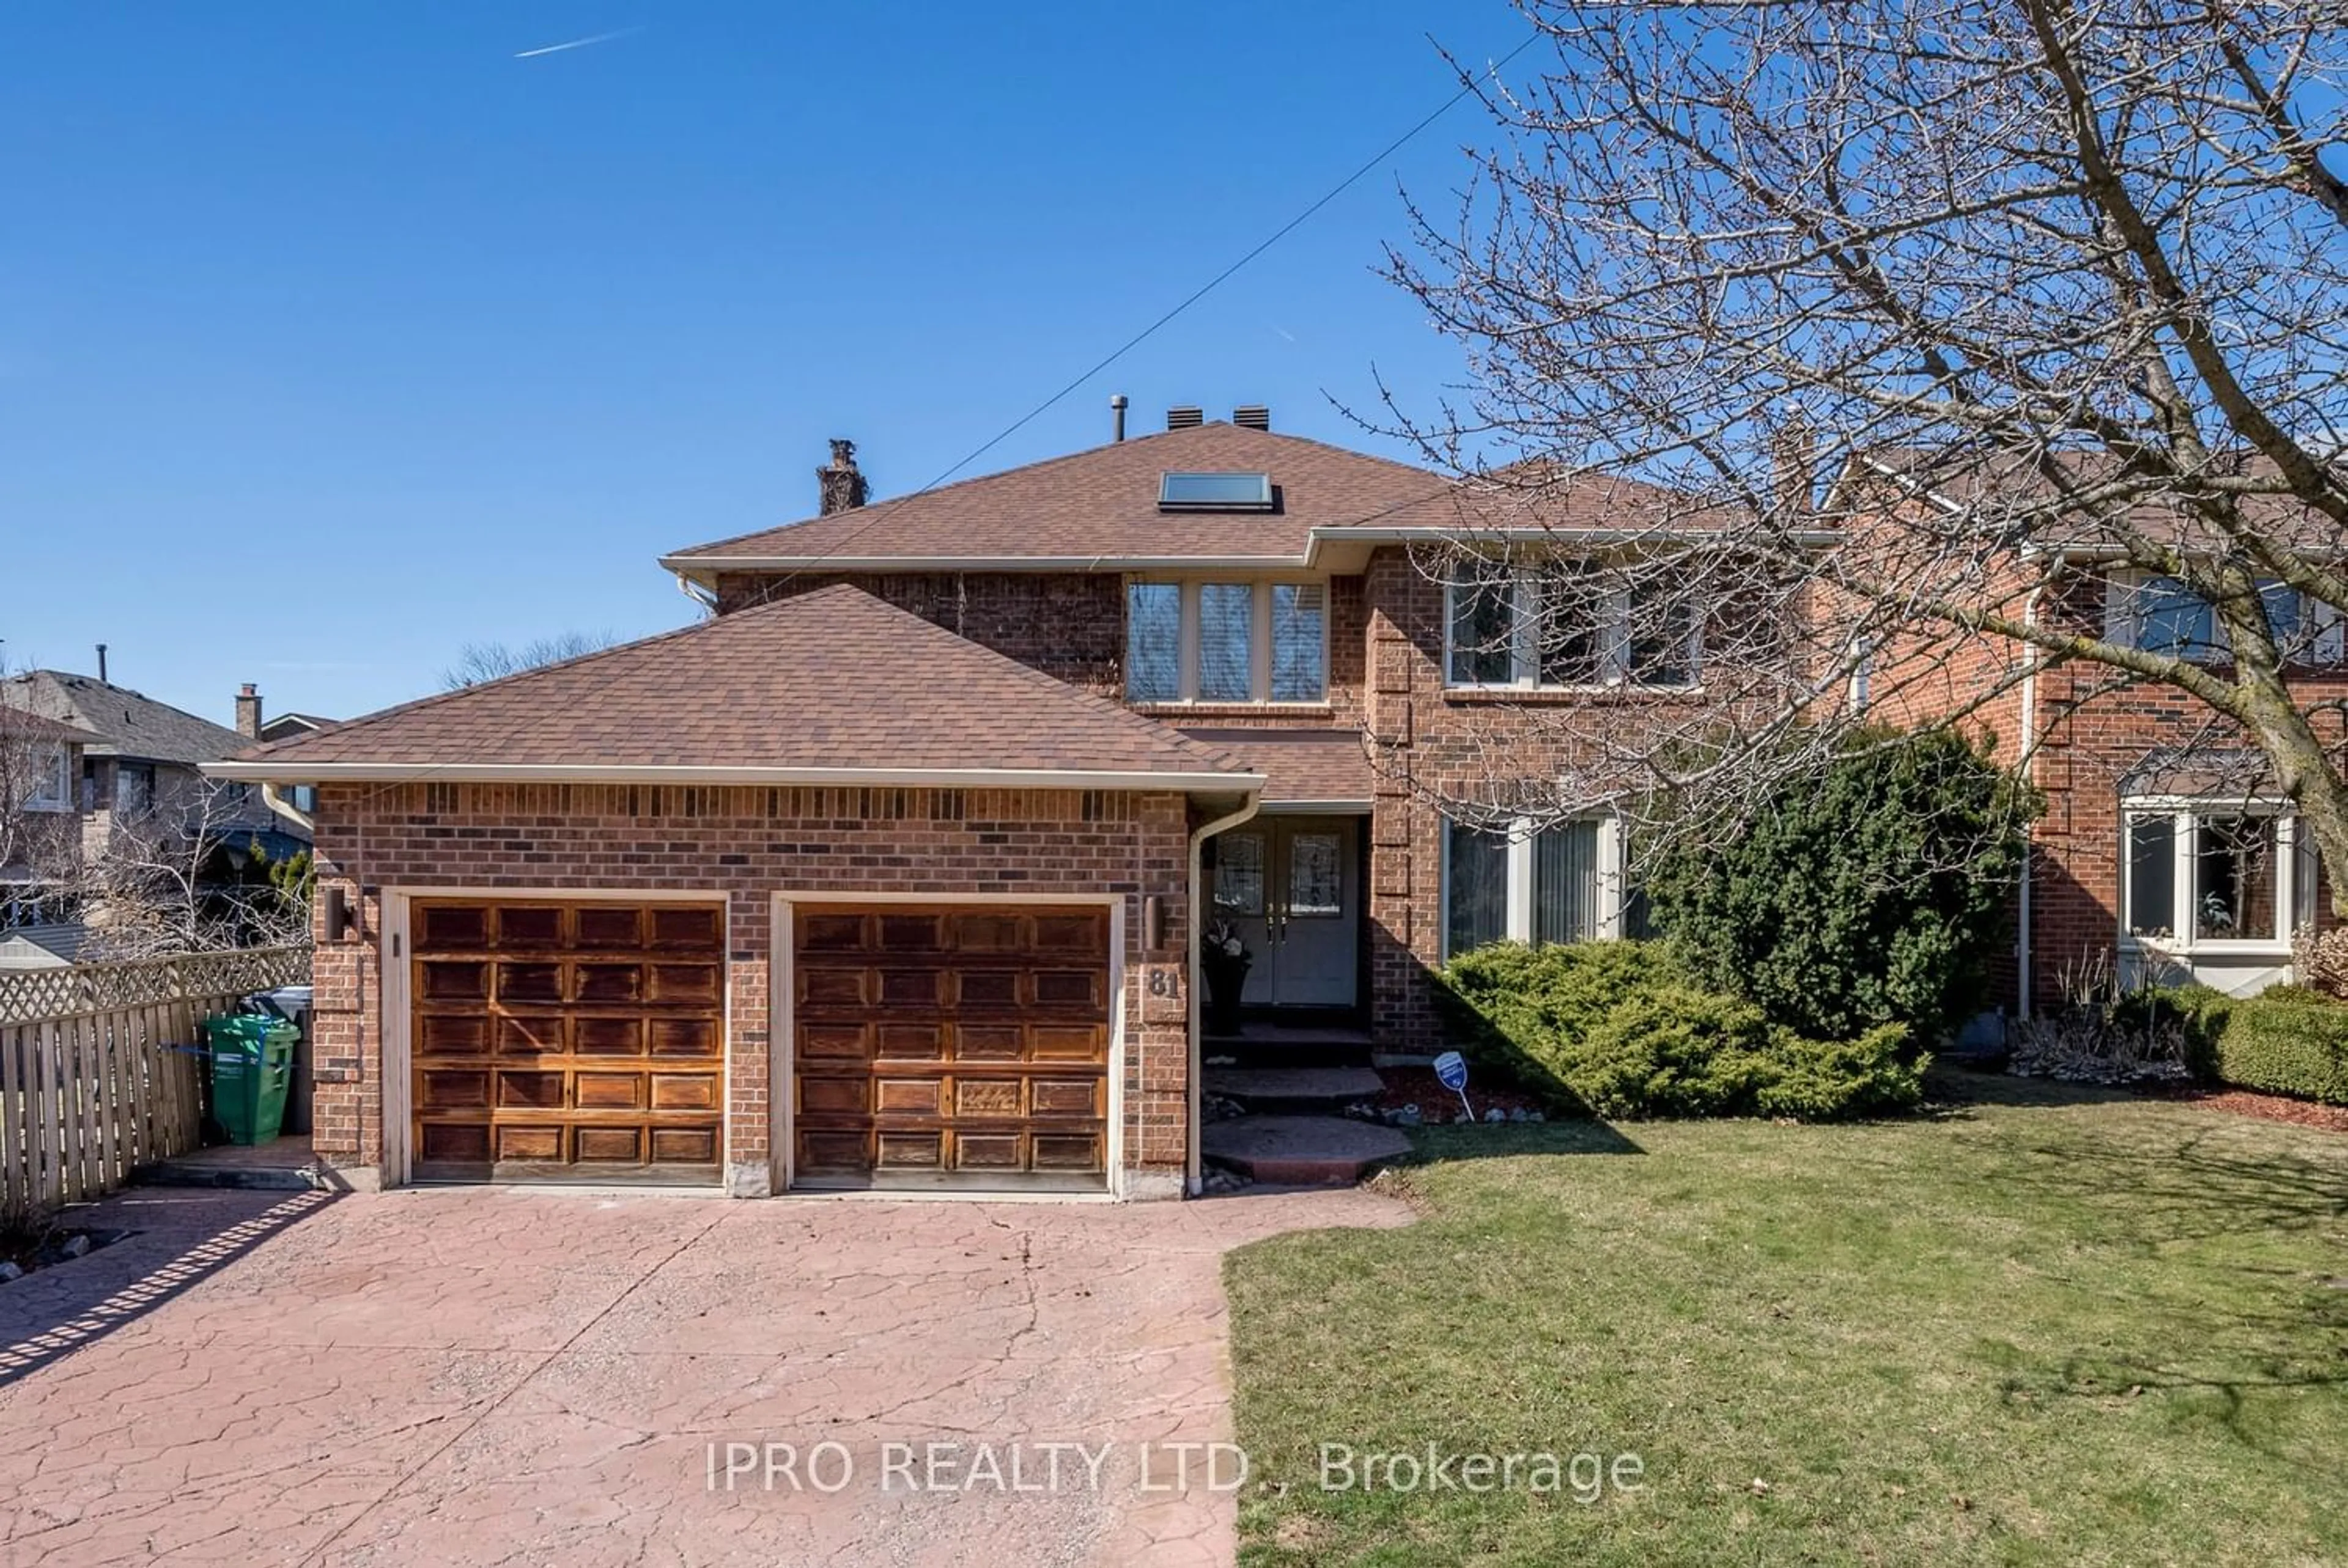 Home with brick exterior material for 81 Barr Cres, Brampton Ontario L6Z 3C9